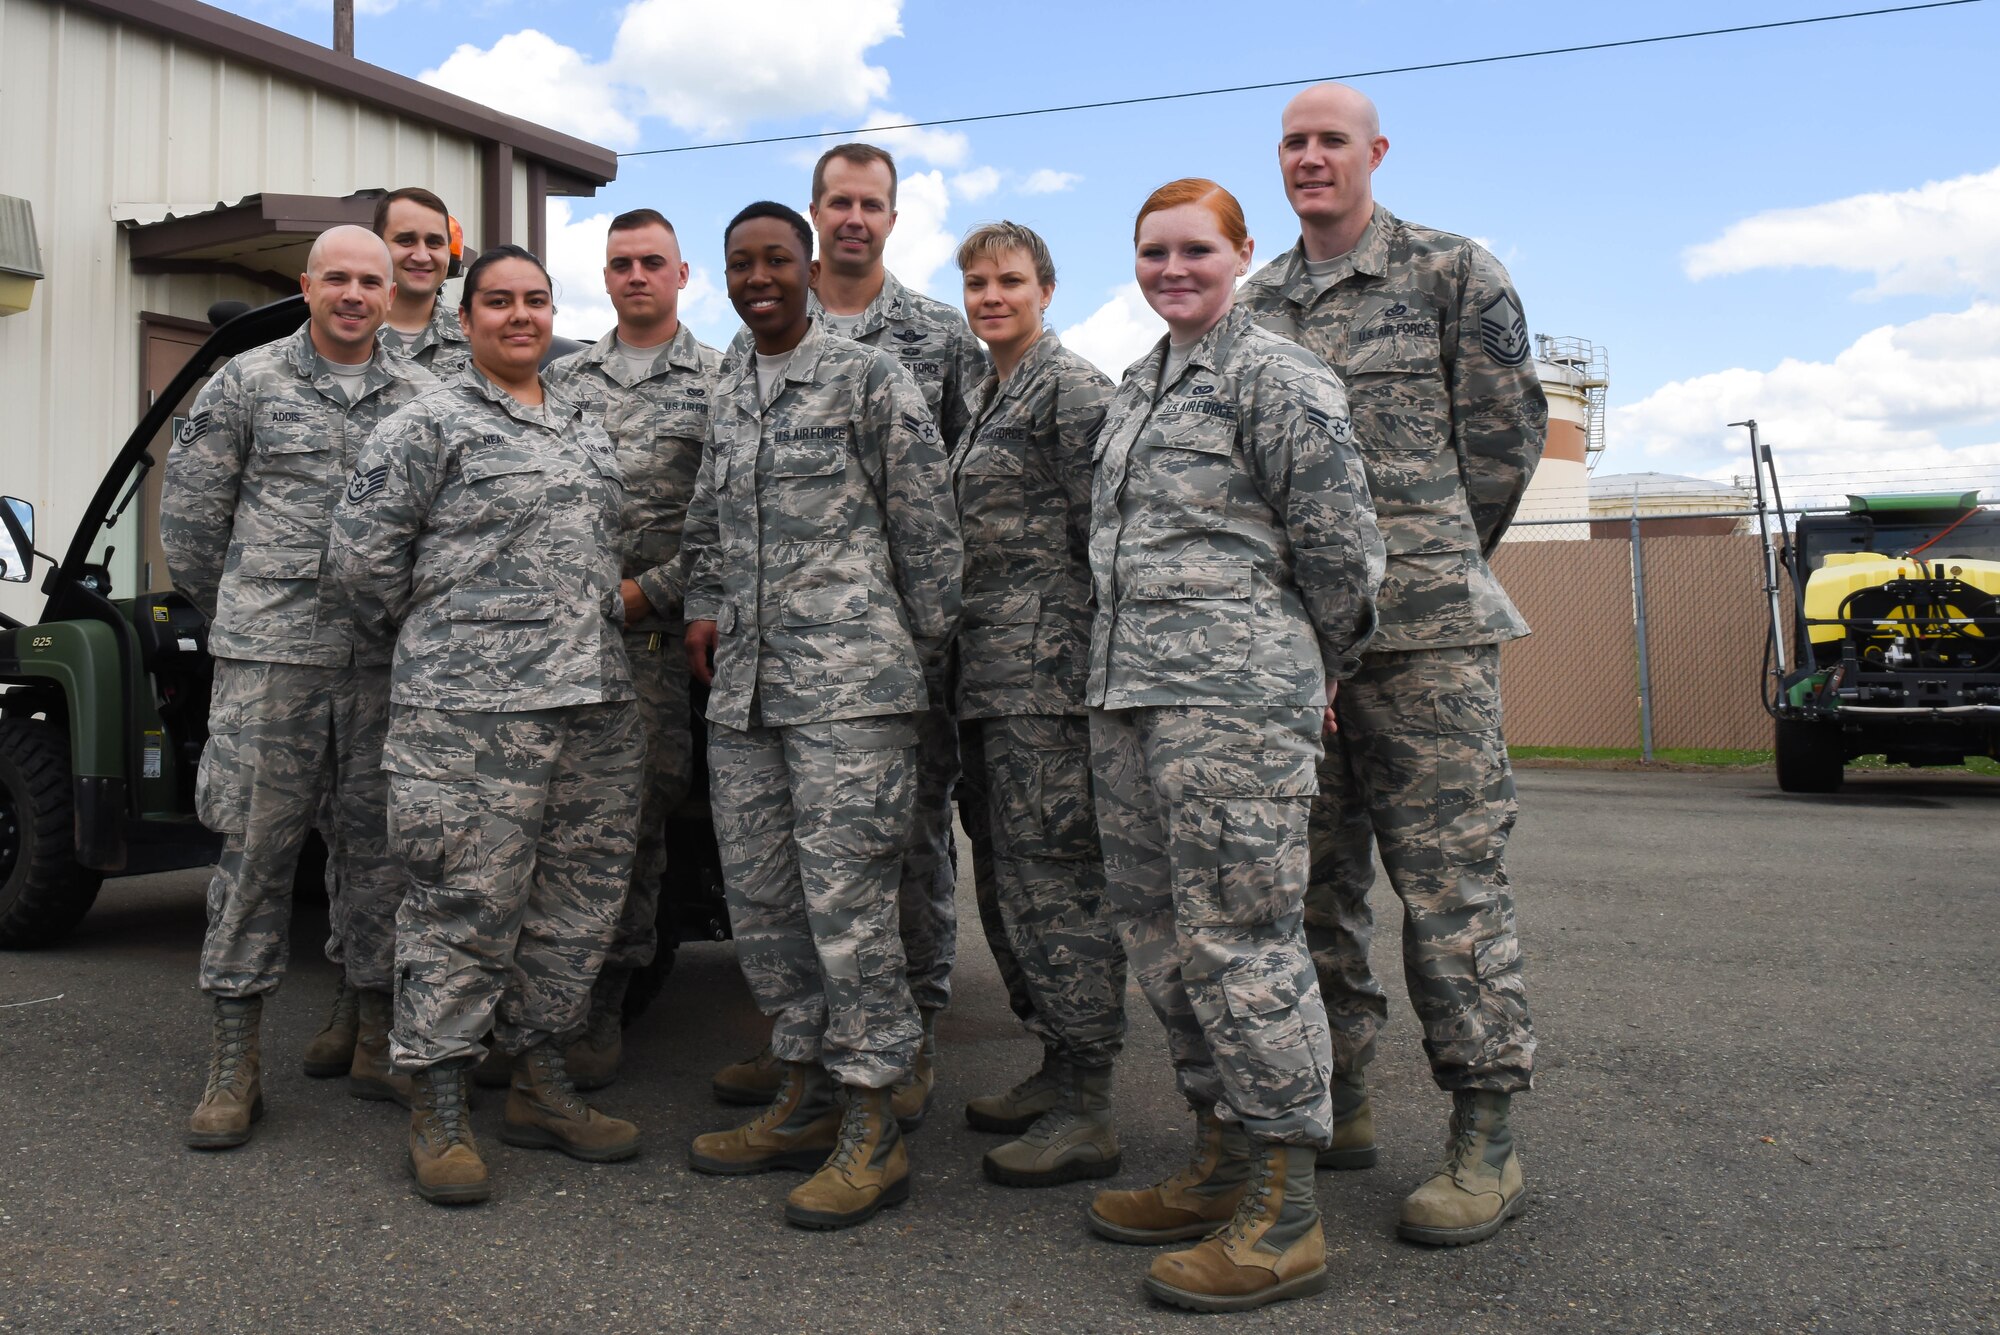 The 2nd Civil Engineer Squadron Pest Management office poses for a group photo with Col. Ty Neuman, 2nd Bomb Wing commander and Chief Master Sgt. Theresa Clapper, command chief, on Barksdale Air Force Base, La., May 24, 2017. Pest management catches feral dogs and wild hogs on base. (U.S. Air Force photo/Airman 1st Class Sydney Bennett)